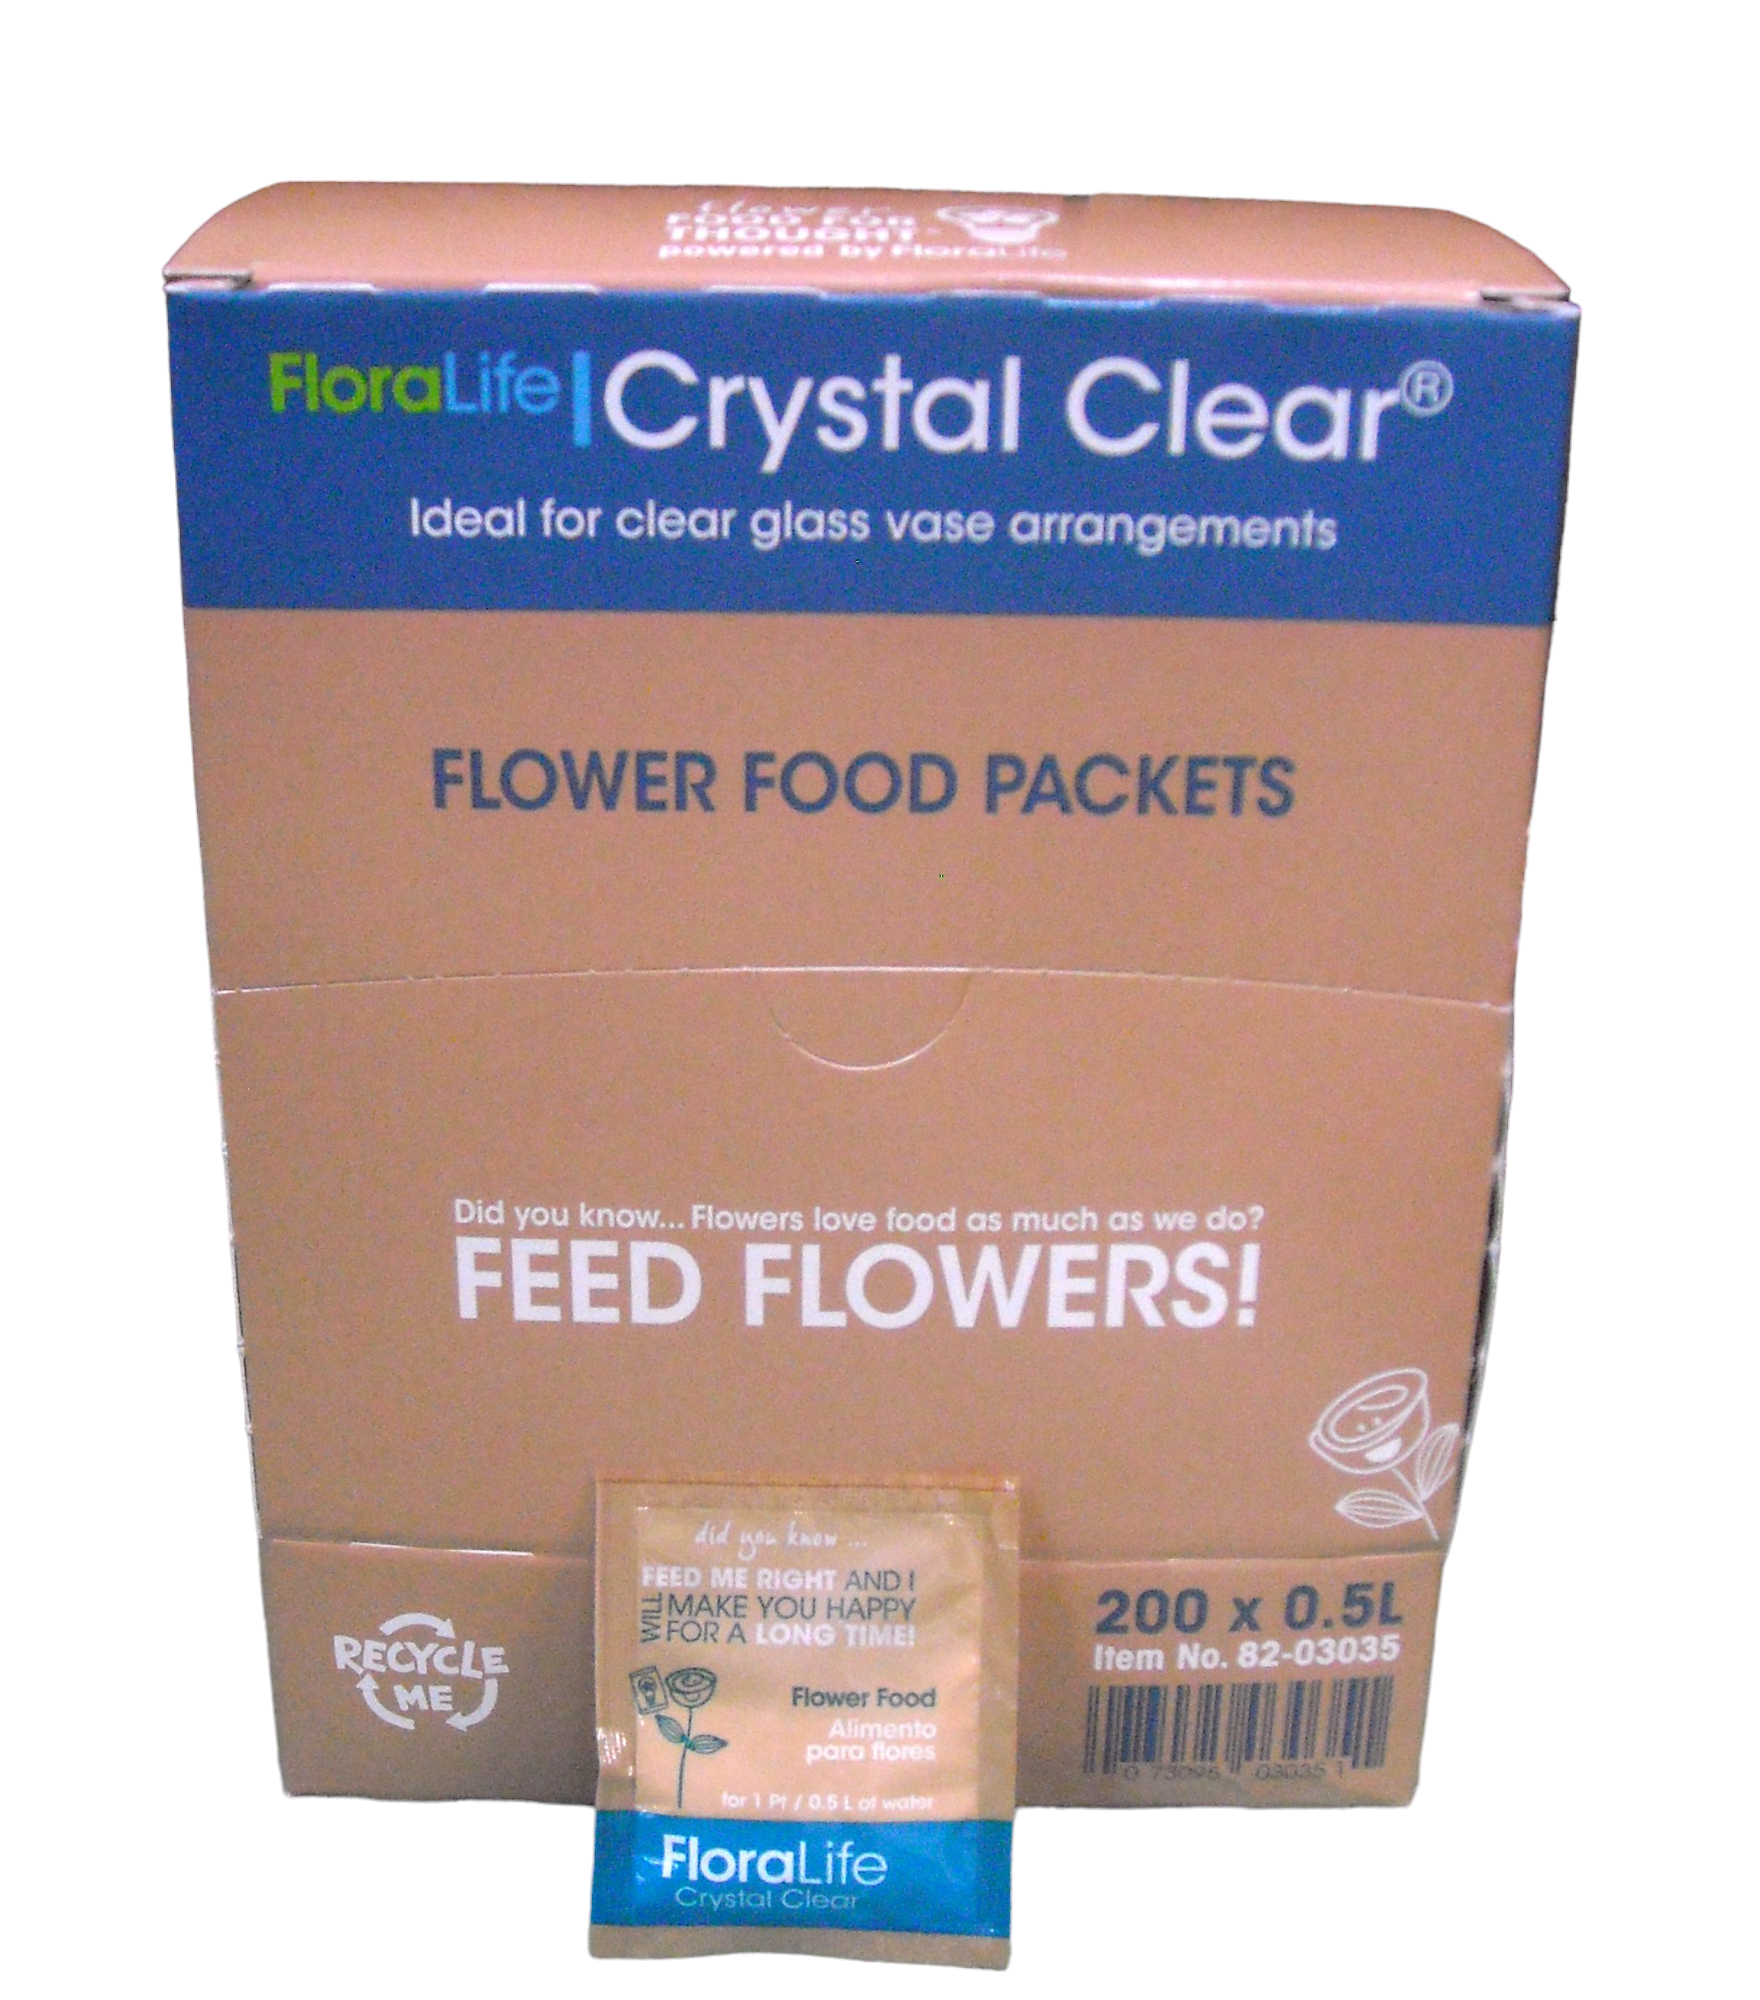 Floralife Crystal Clear 5 Gram Sachets S/200
Counter Display, Recyclable Packaging 